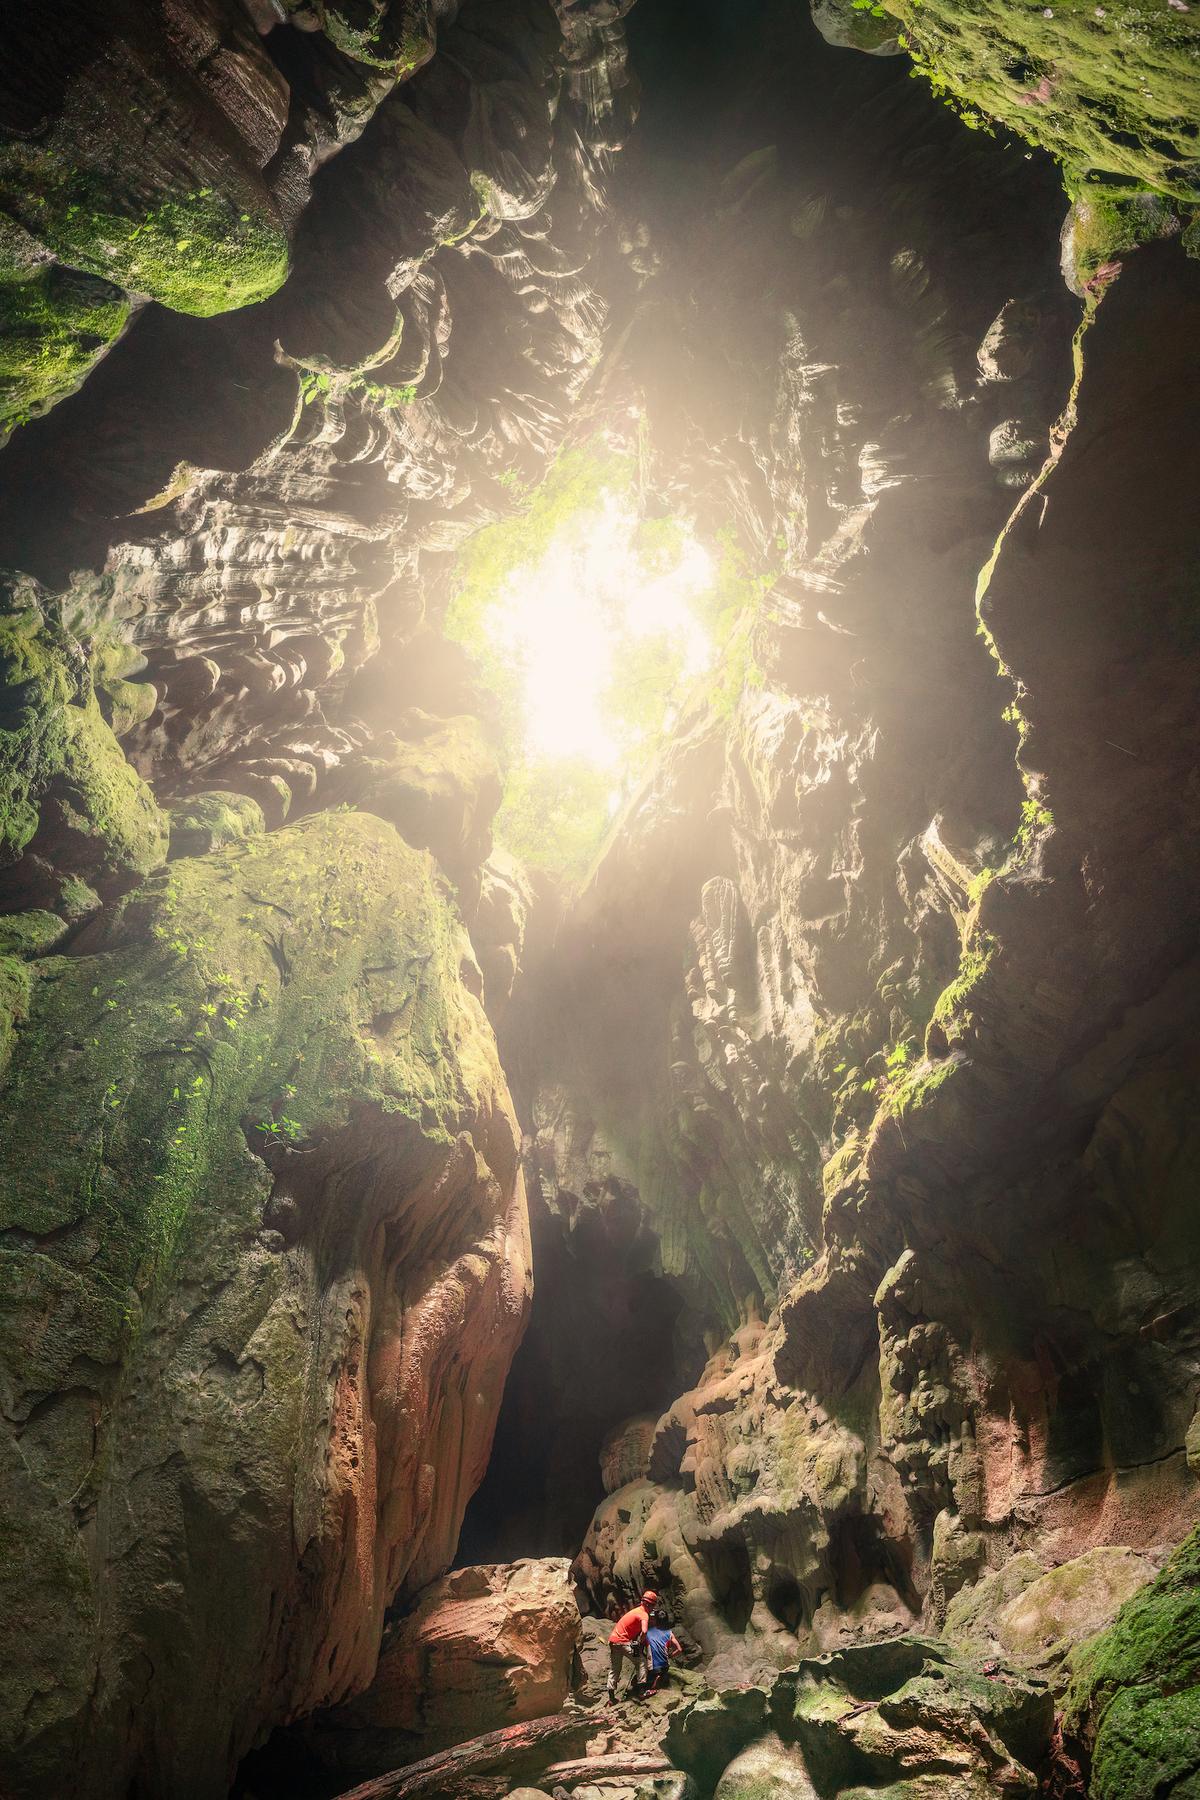 Looking up at the sky through a sinkhole at Thung Cave. (Courtesy of Cao Ky Nhan via Jungle Boss Tours)